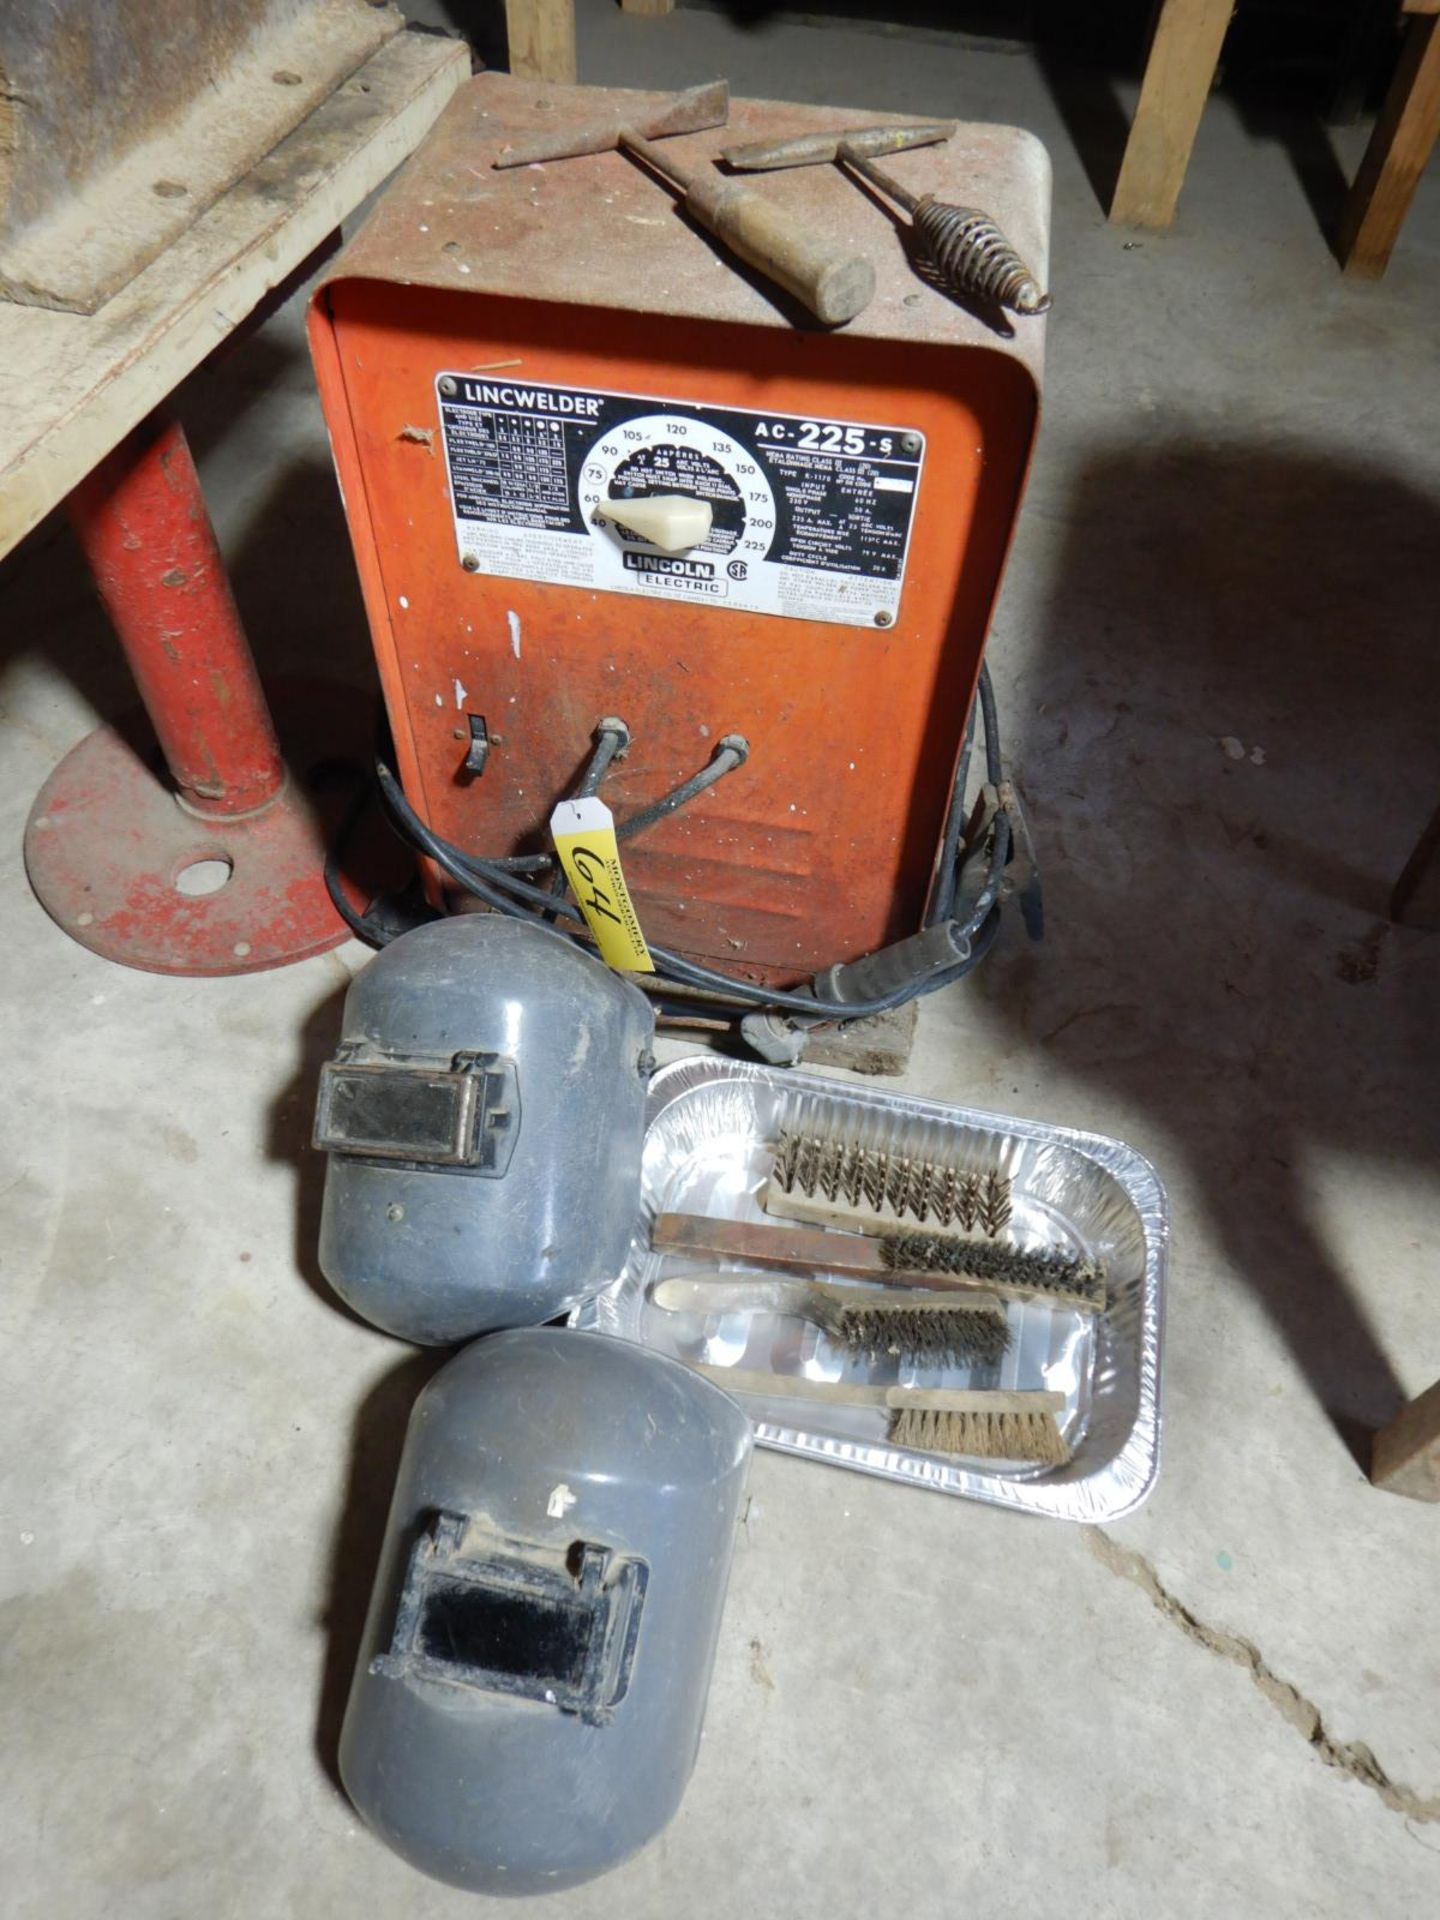 LINCOLN WELDER AC225C W/CABLES, HELMET, CHIPPING HAMMER, WIRE BRUSHES, ETC - Image 2 of 2